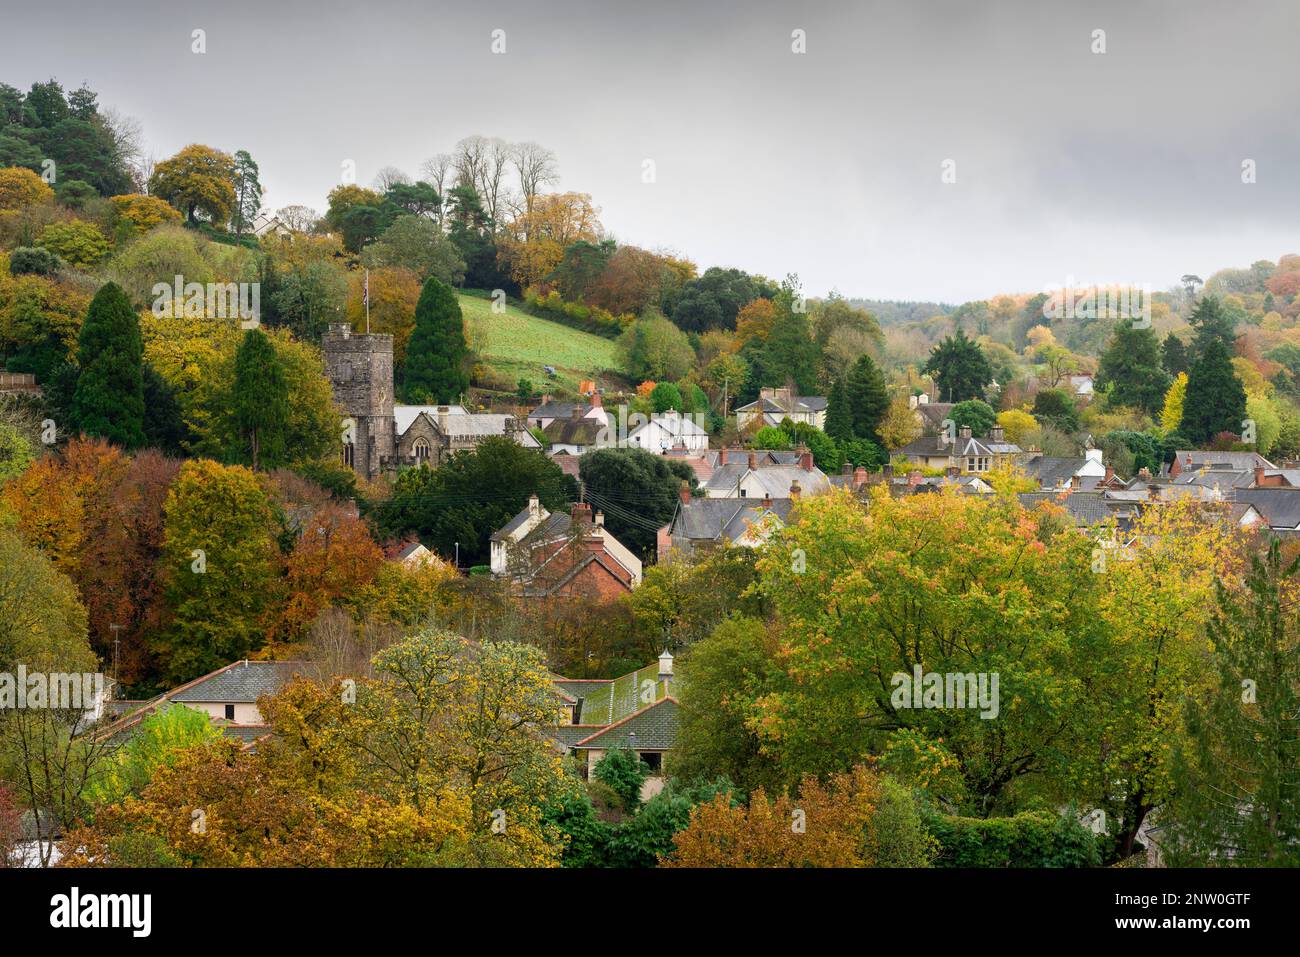 The town of Dulverton in the Barle Valley, Exmoor National Park, Somerset, England. Stock Photo